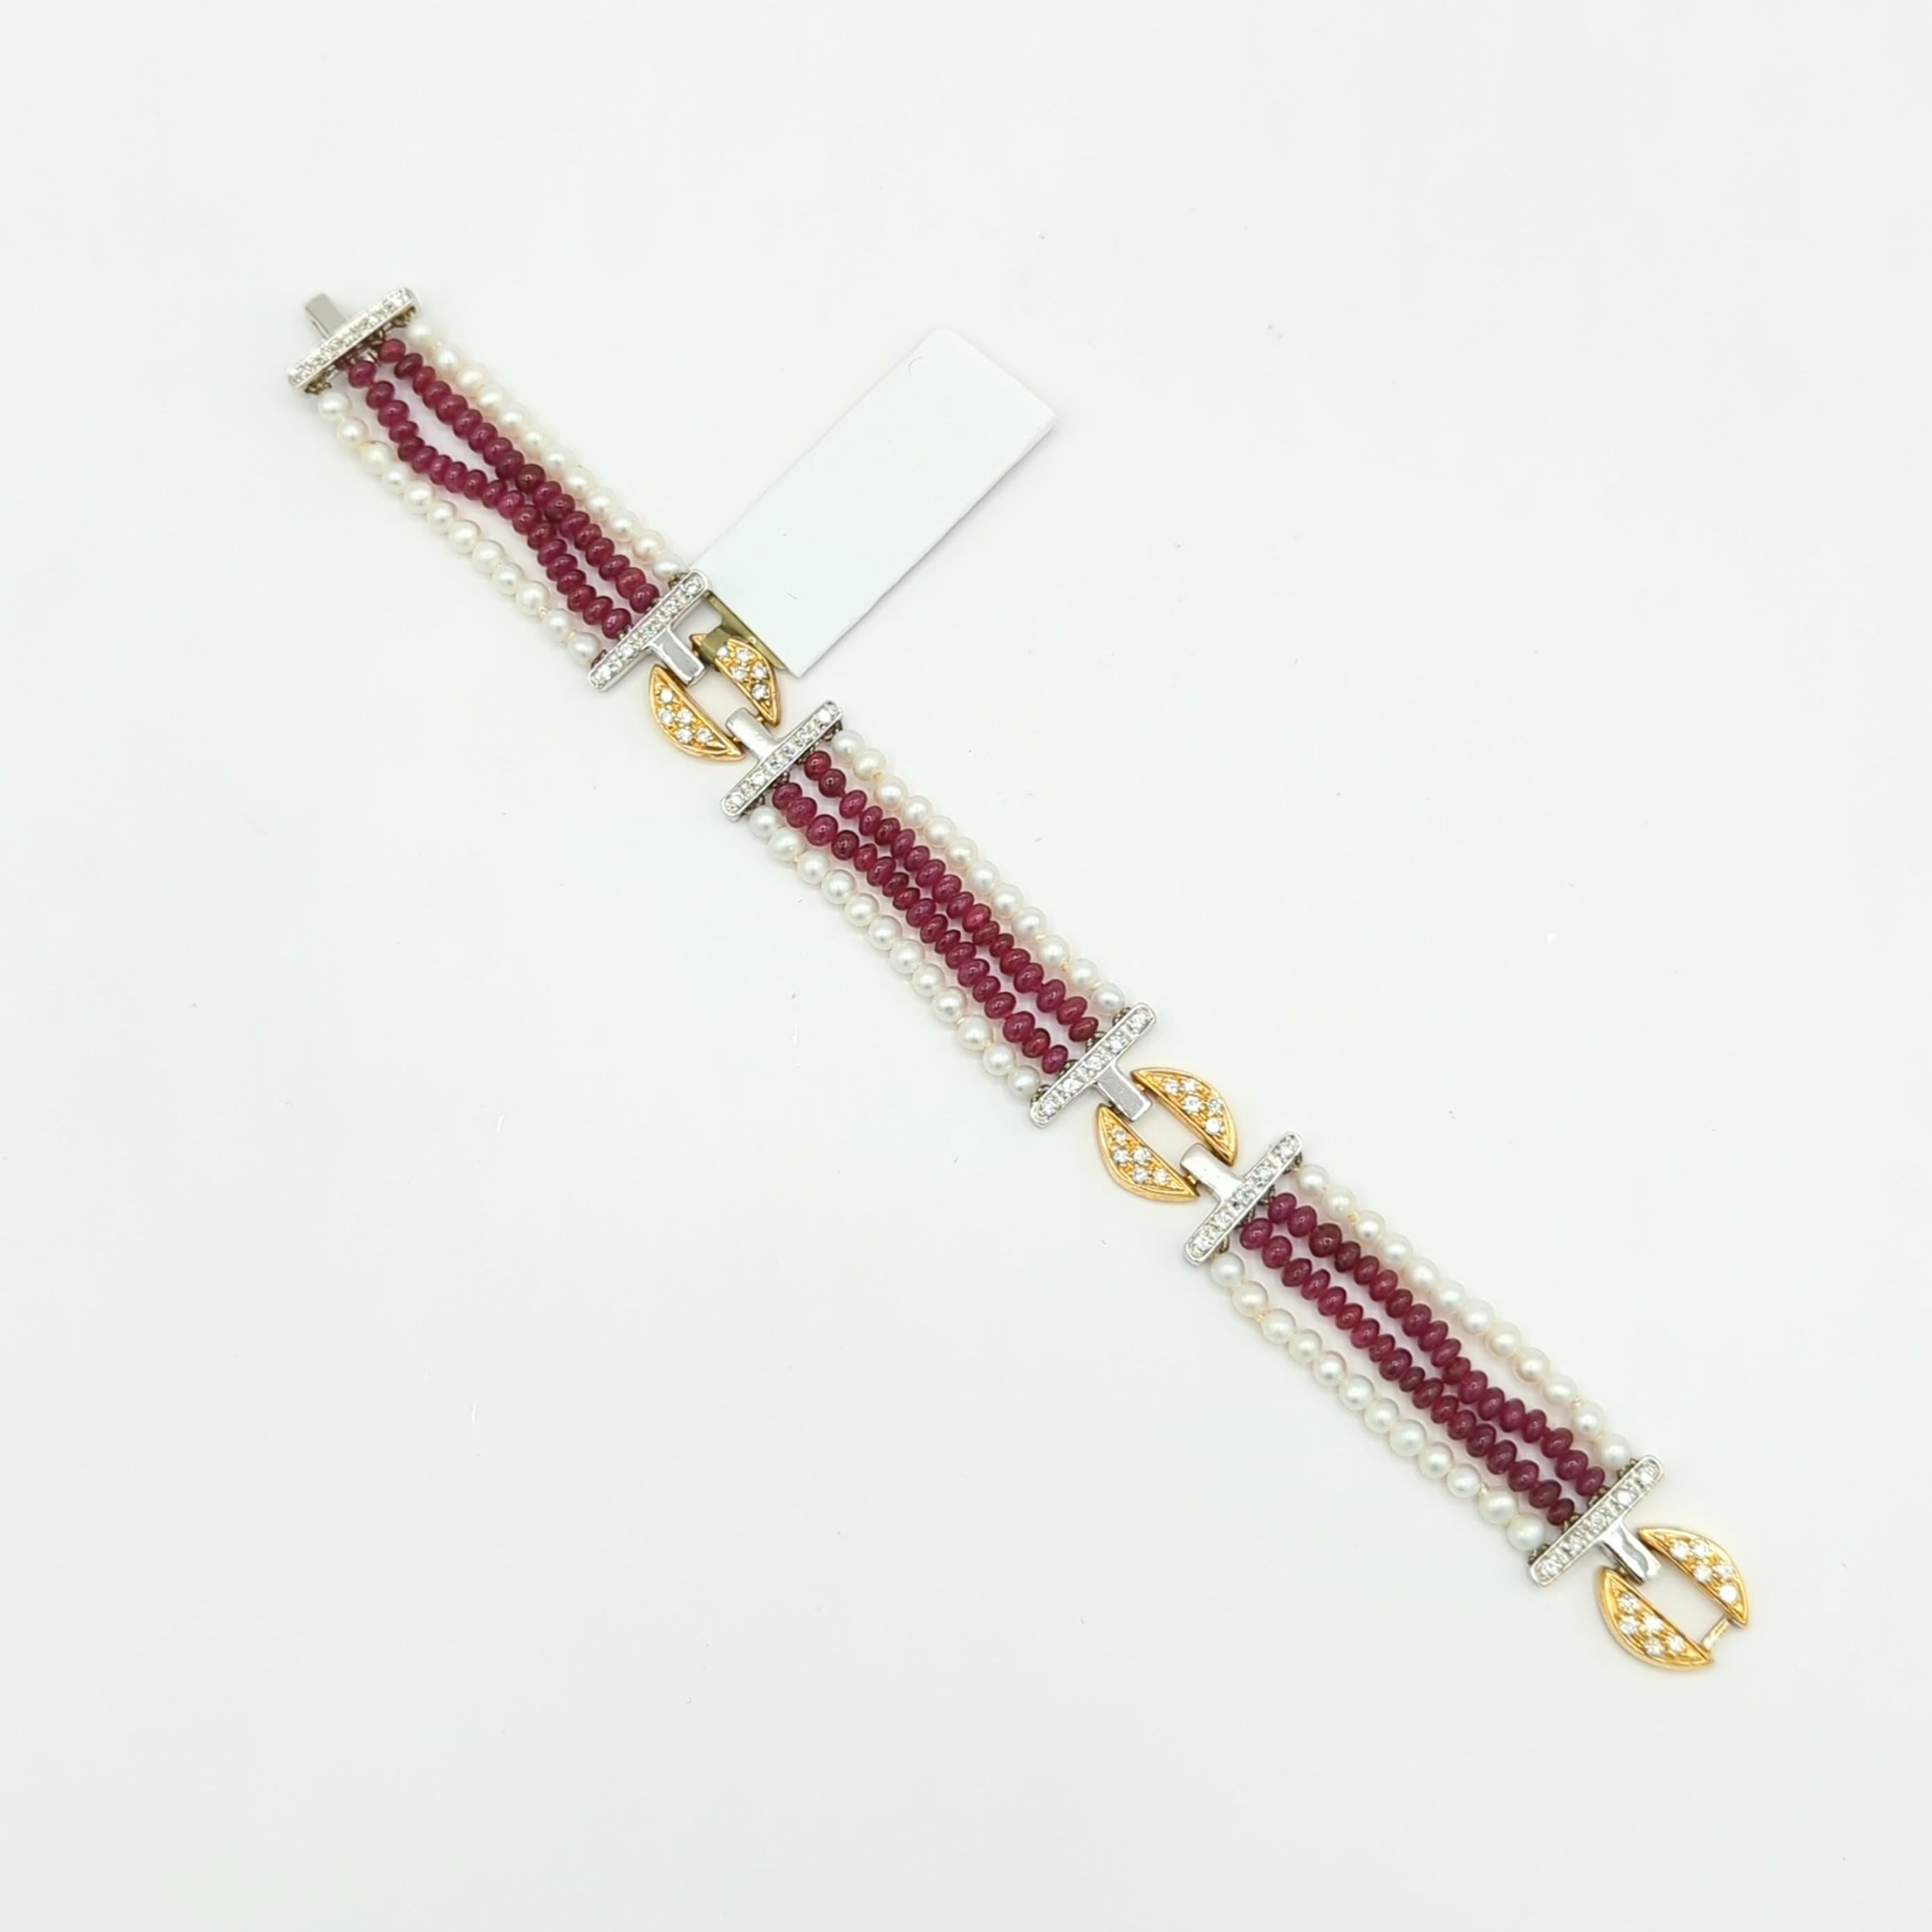 Ruby Bead, White Pearl, and White Diamond Bracelet in 18K 2 Tone Gold For Sale 4